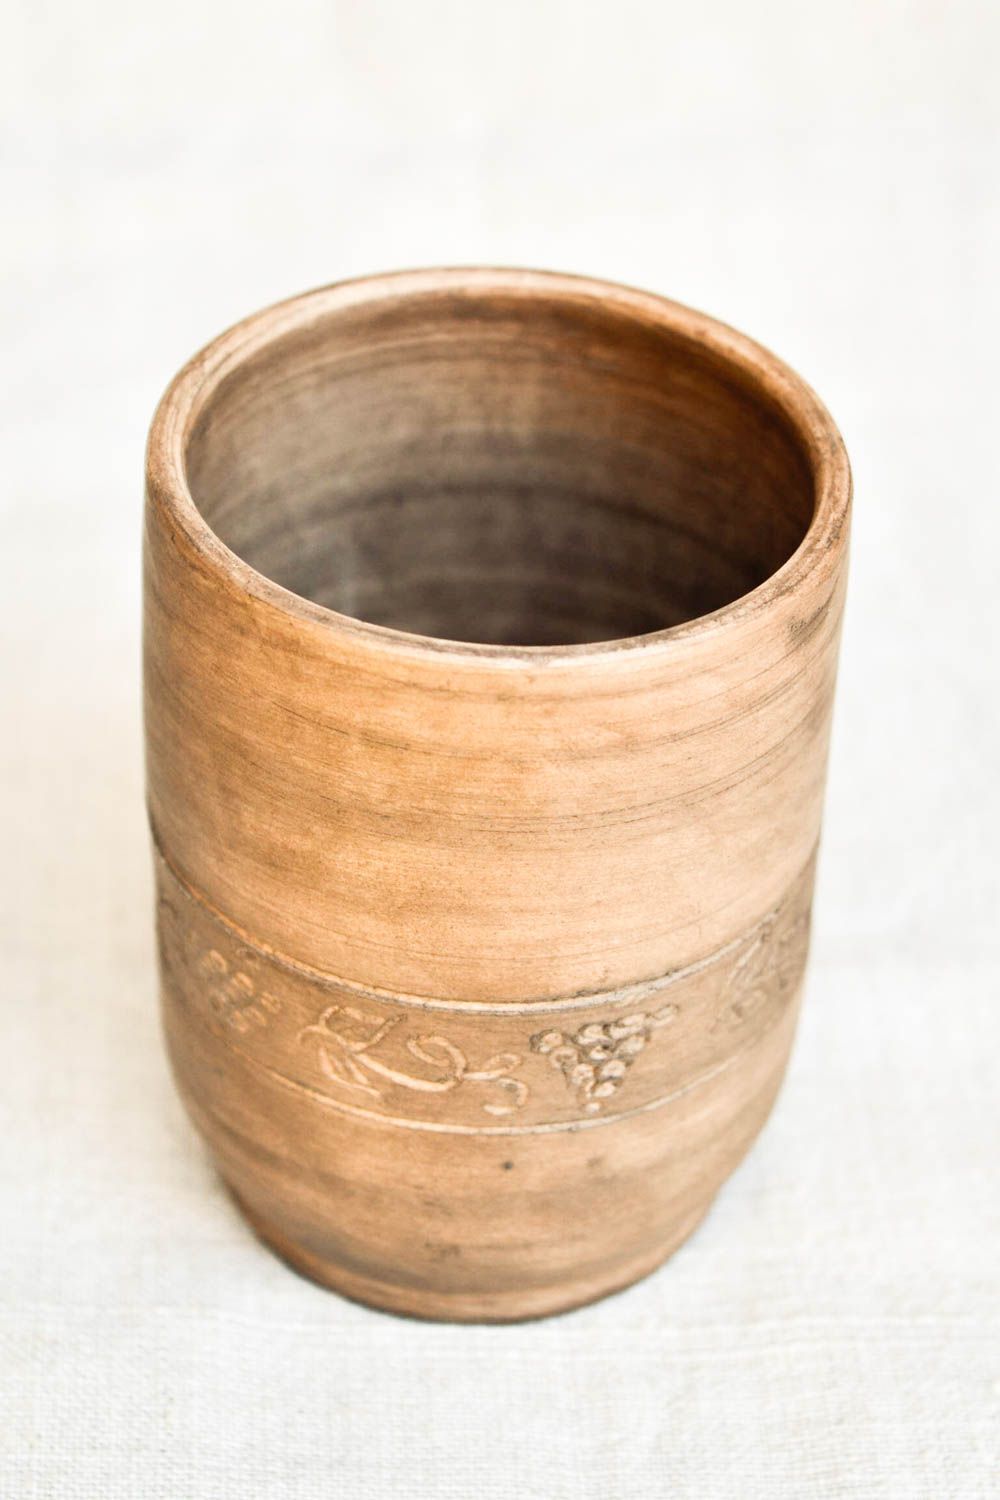 Tall 10 oz clay rustic cup with no handle with plain floral pattern photo 4